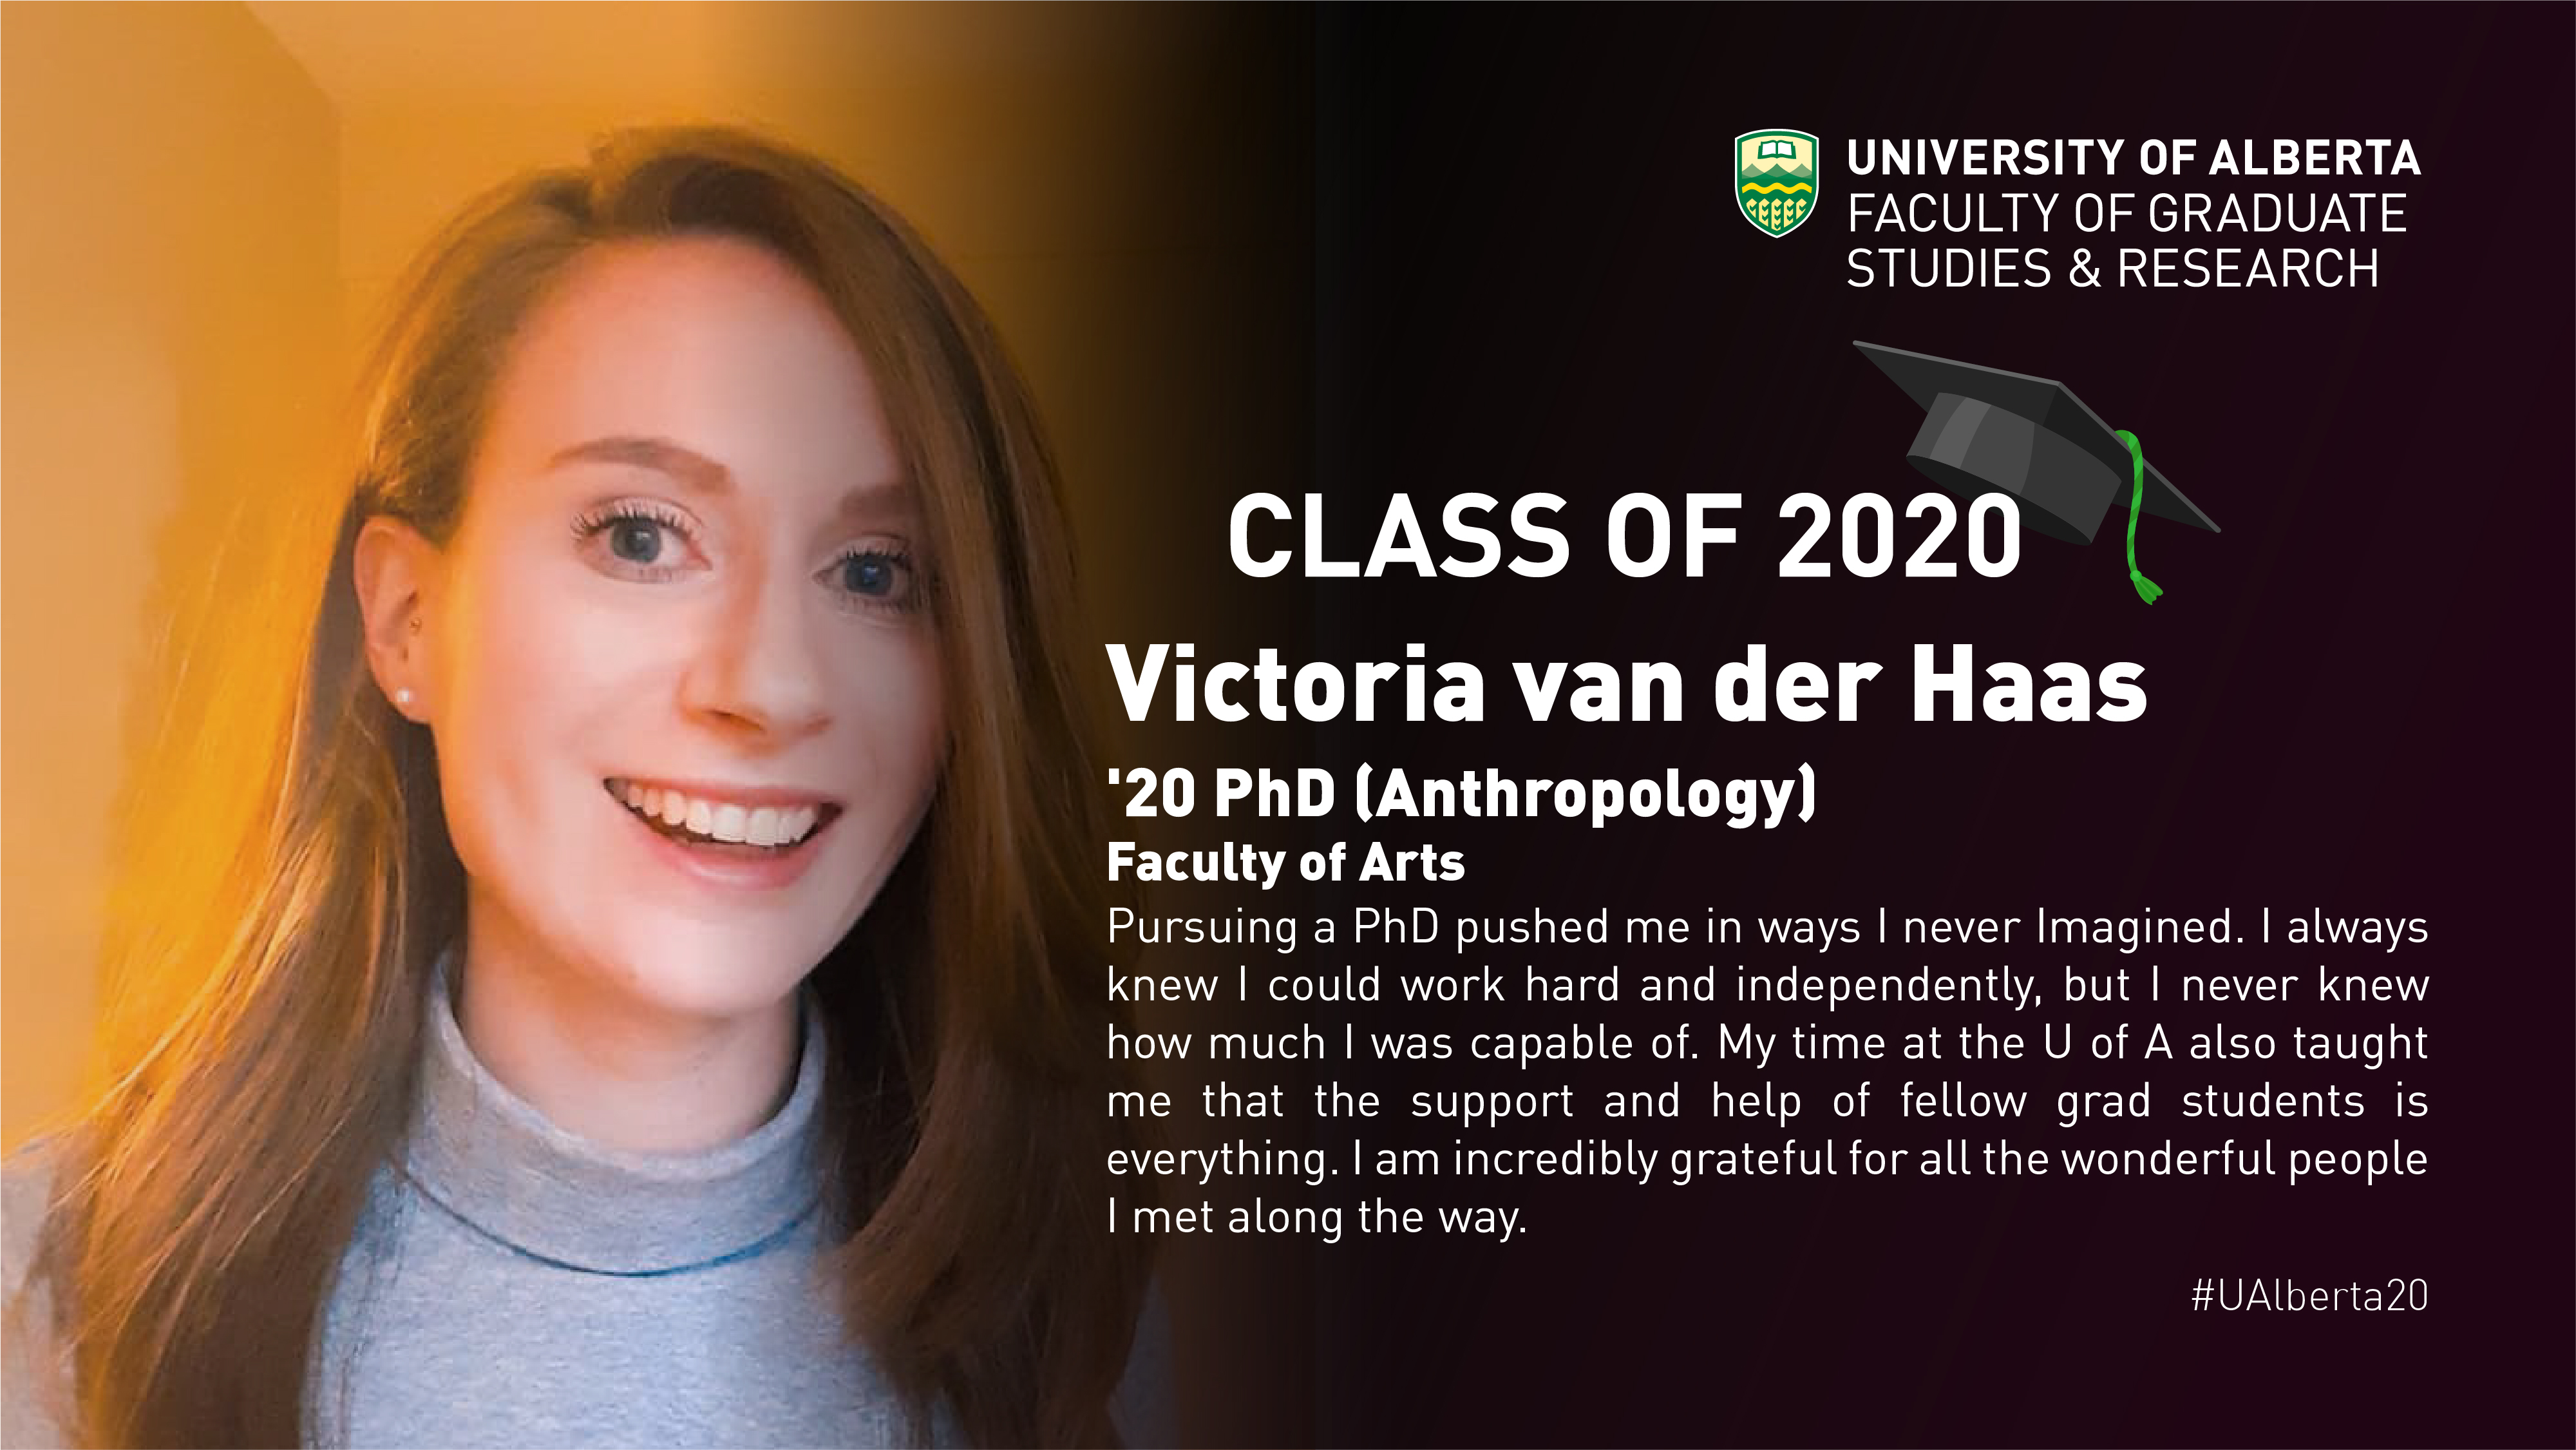 Insight from our Graduates | Victoria van der Haas, '20 PhD (Anthropology)